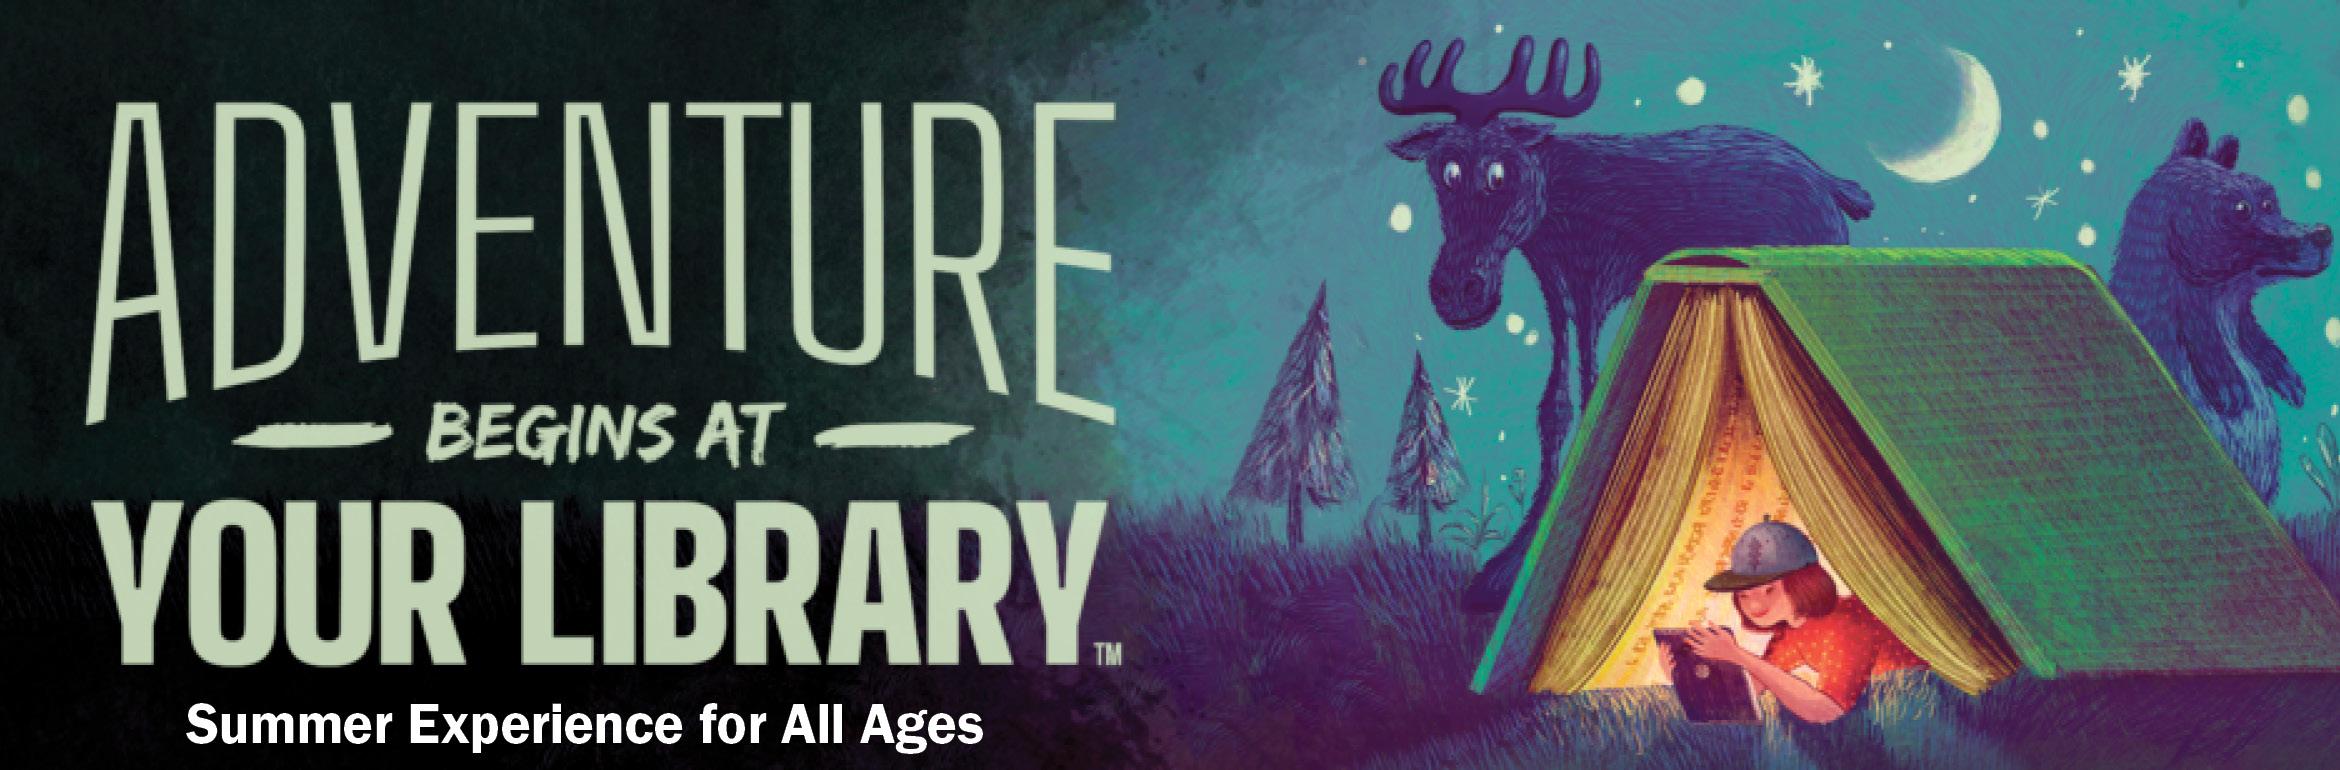 Adventure Begins at Your Library. Summer Experience for All Ages.